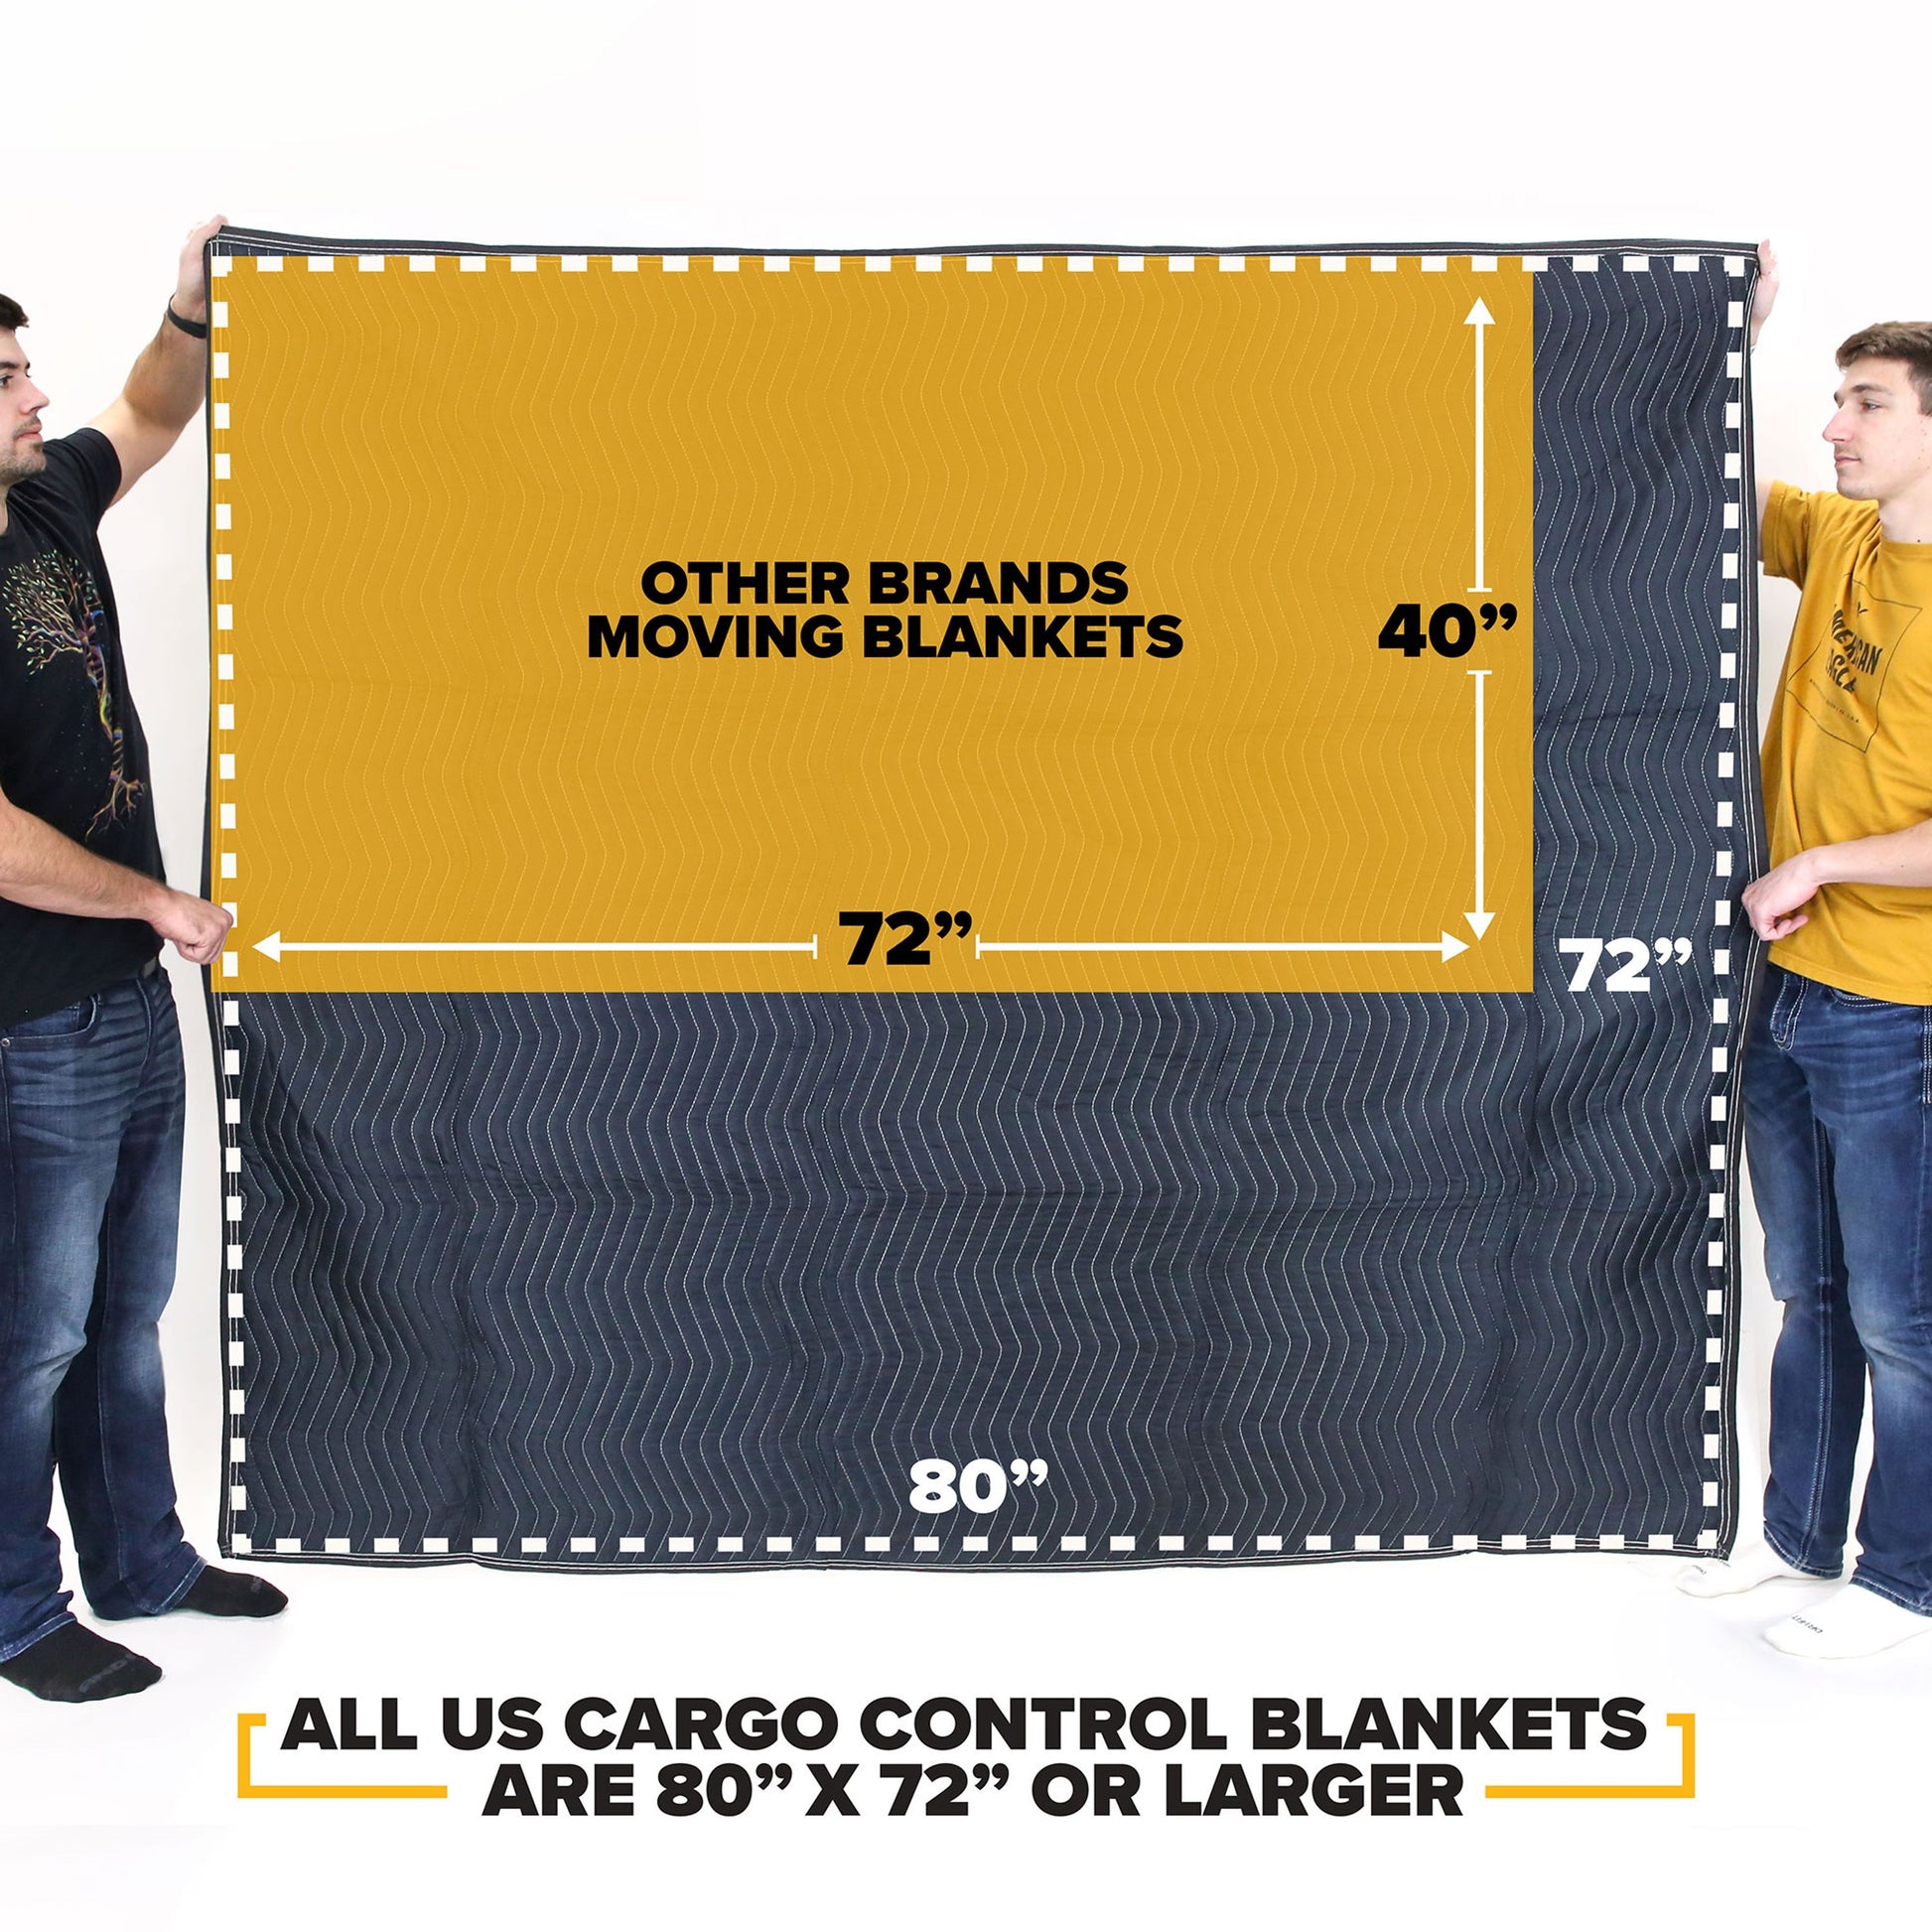 Moving Blanket- Econo Deluxe image 4 of 11